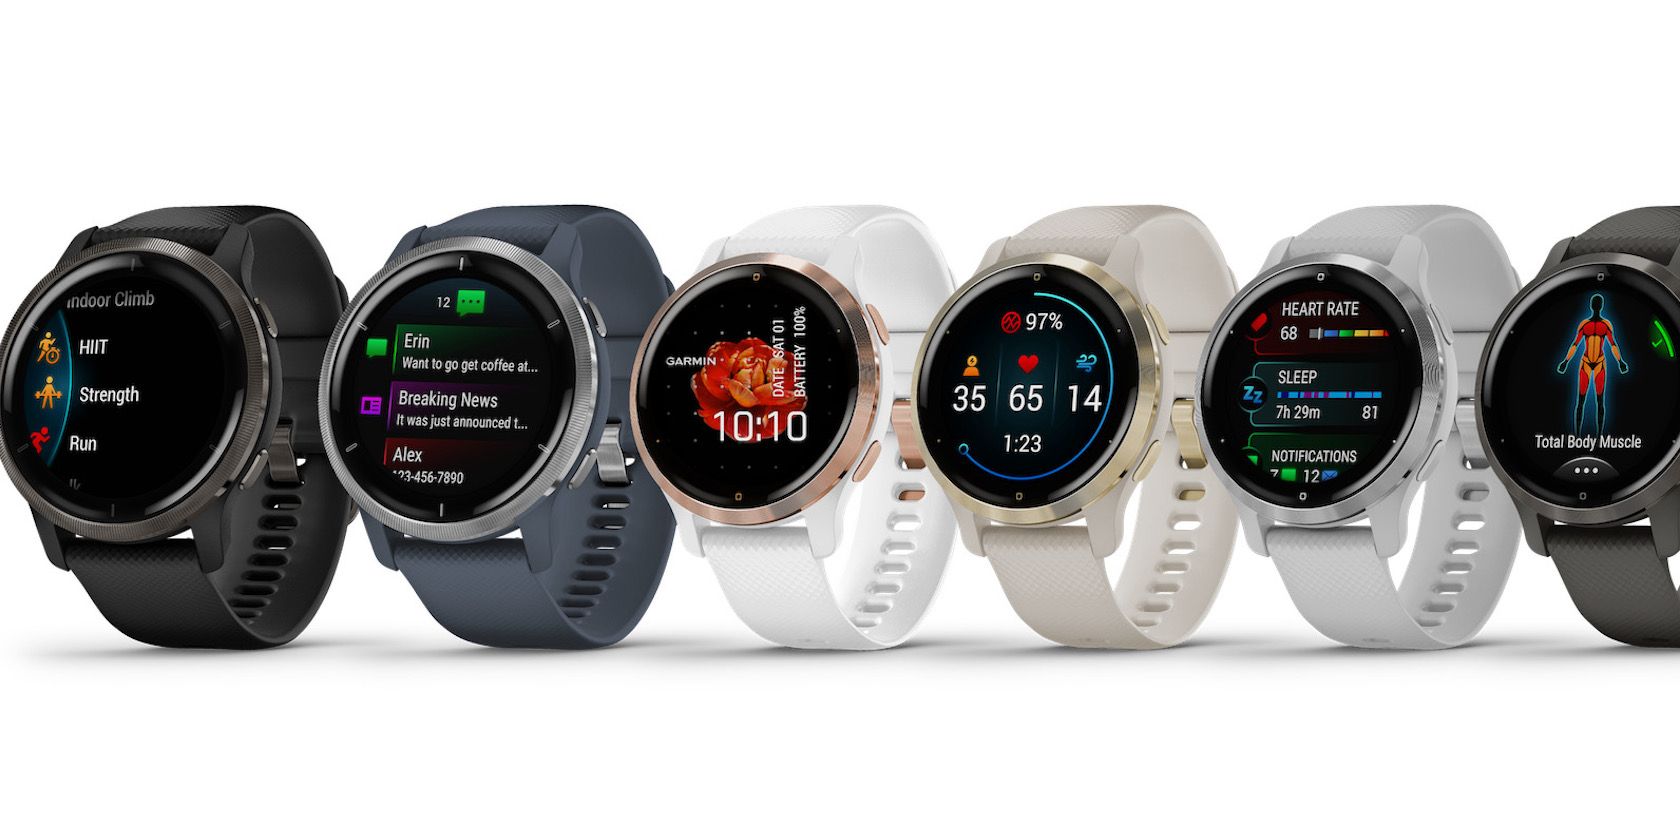 Garmin Releases the Venu 2 Smartwatch With AllDay Health Tracking